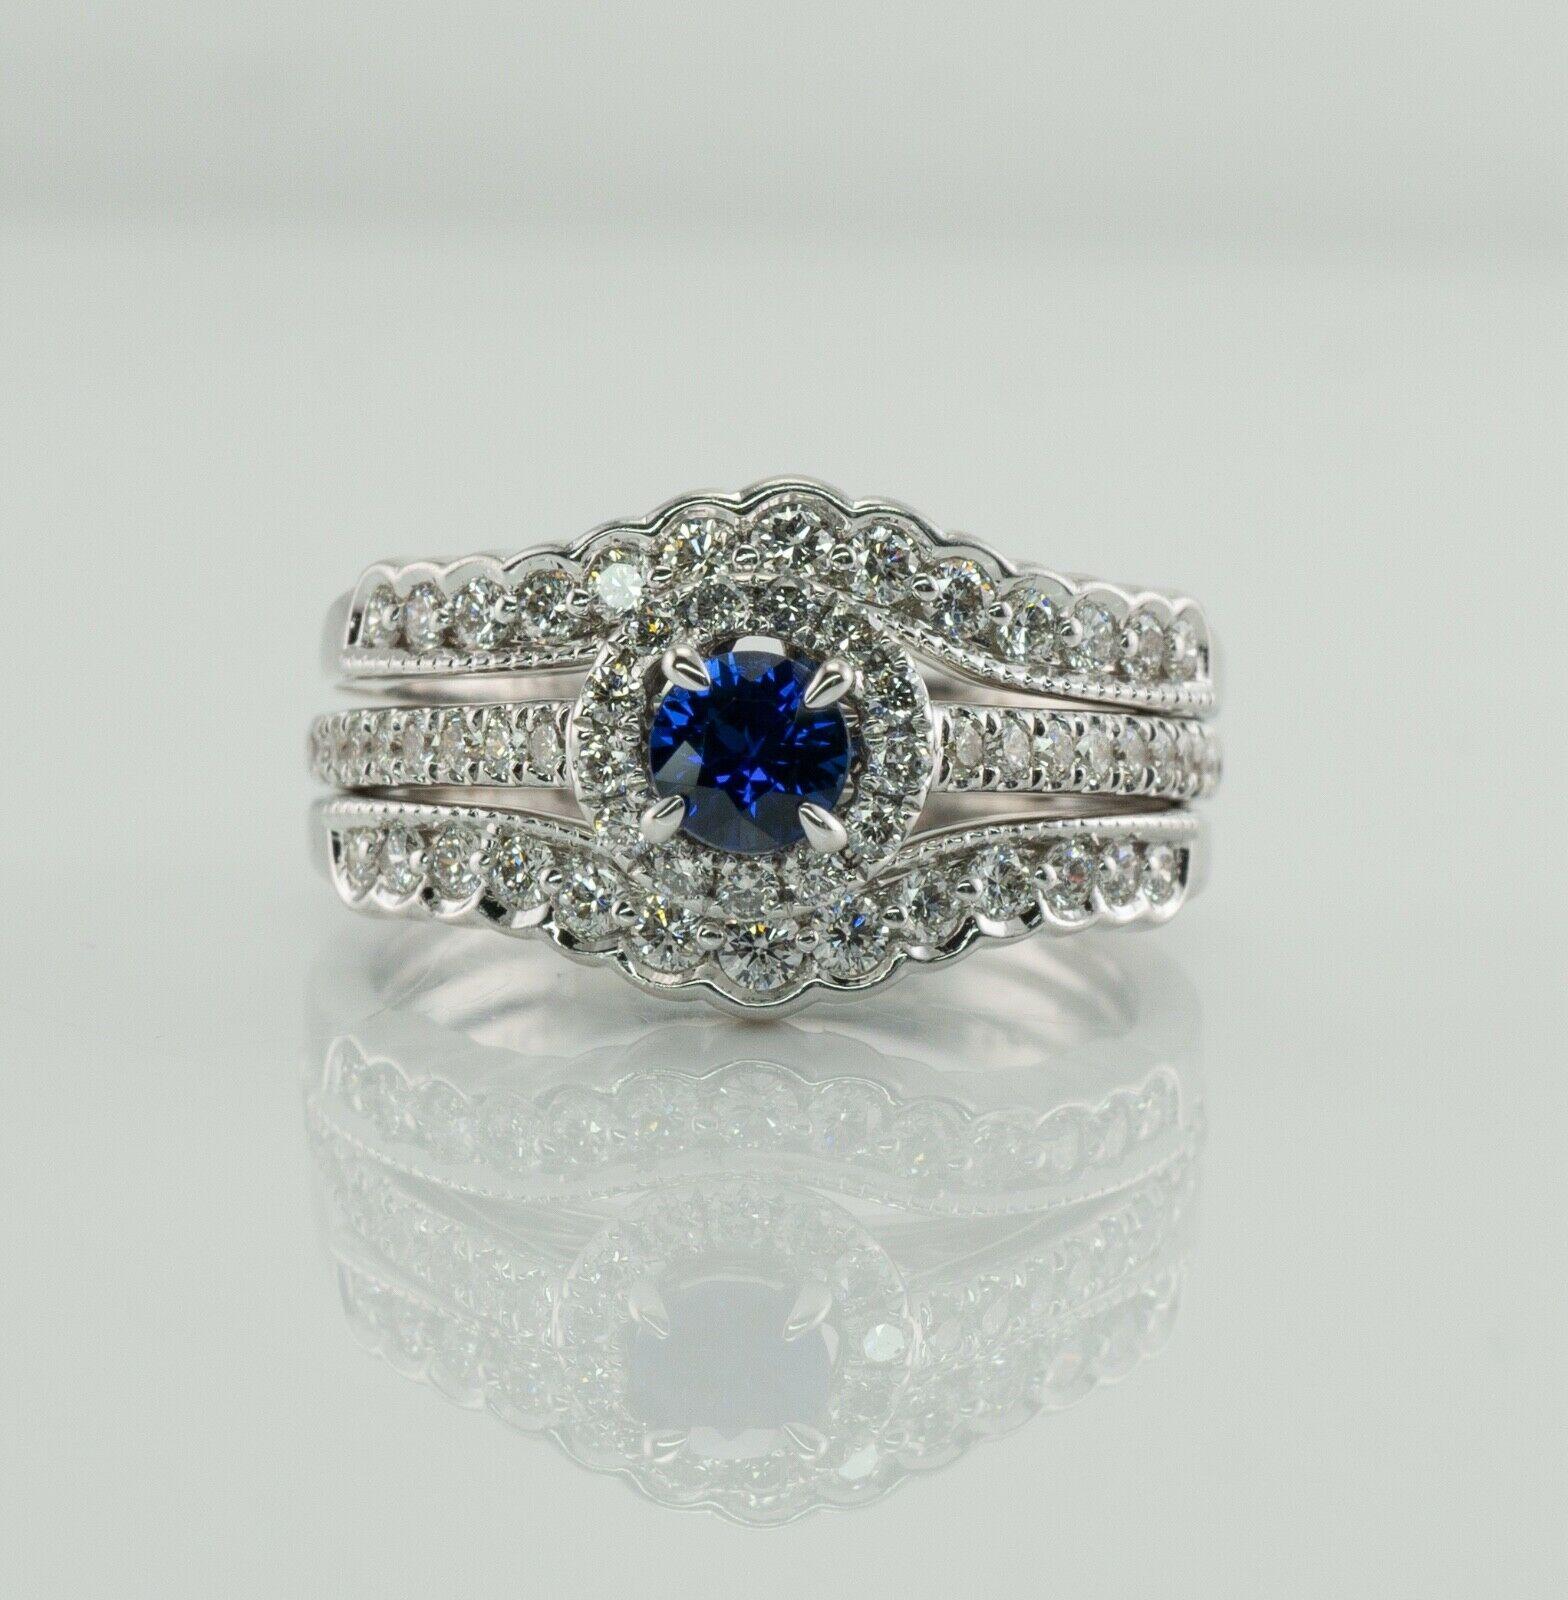 This estate ring is crafted in solid 14K White Gold.
The center natural Earth mined round Sapphire is 4mm (.34 carat).
This is a very clean and transparent gem of great intensity and strong brilliance. 
The center stone is surrounded with 13 round